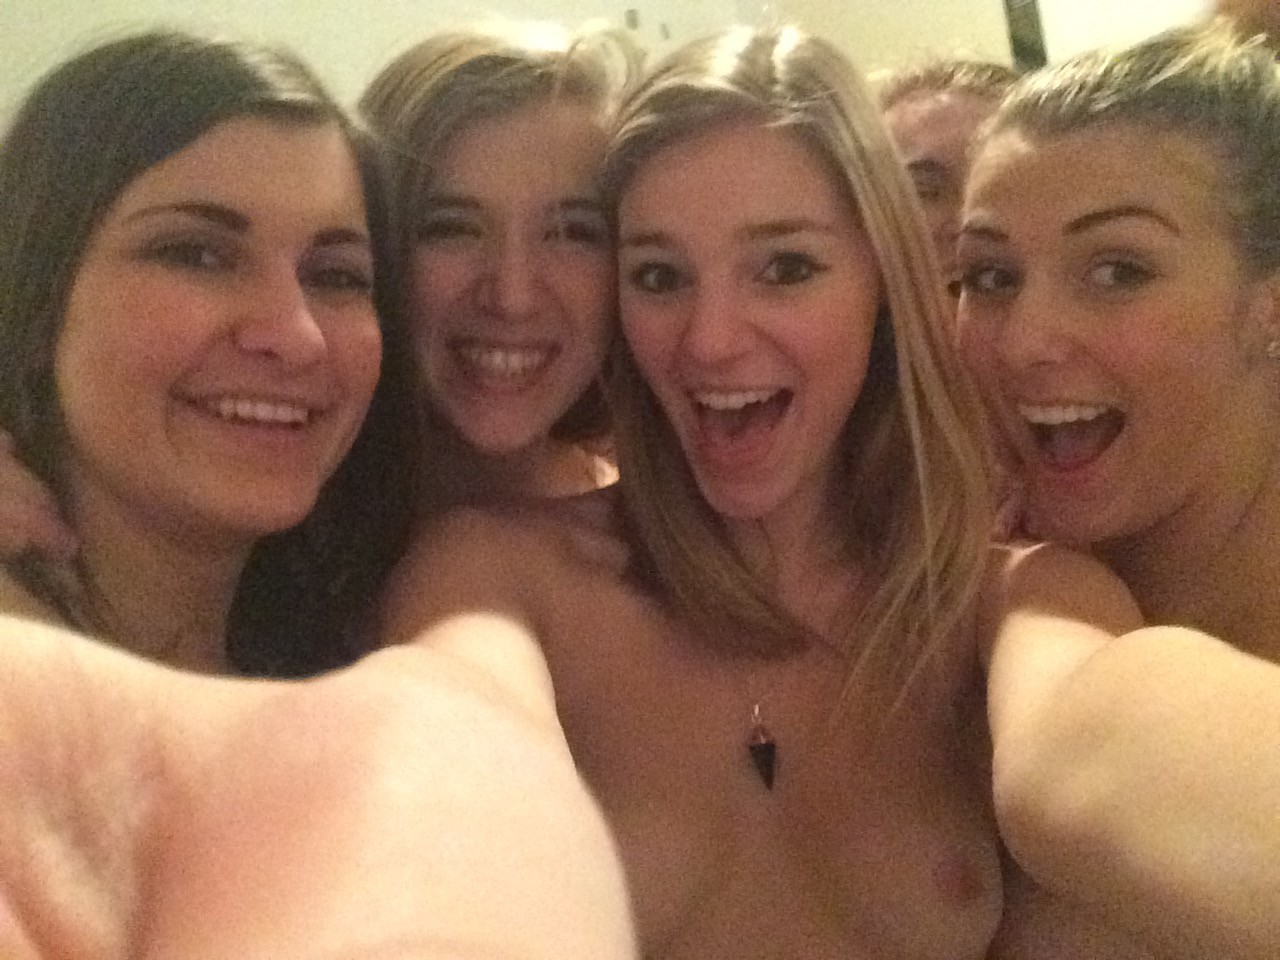 Friends Flashing Together - Porn Videos and Photos photo